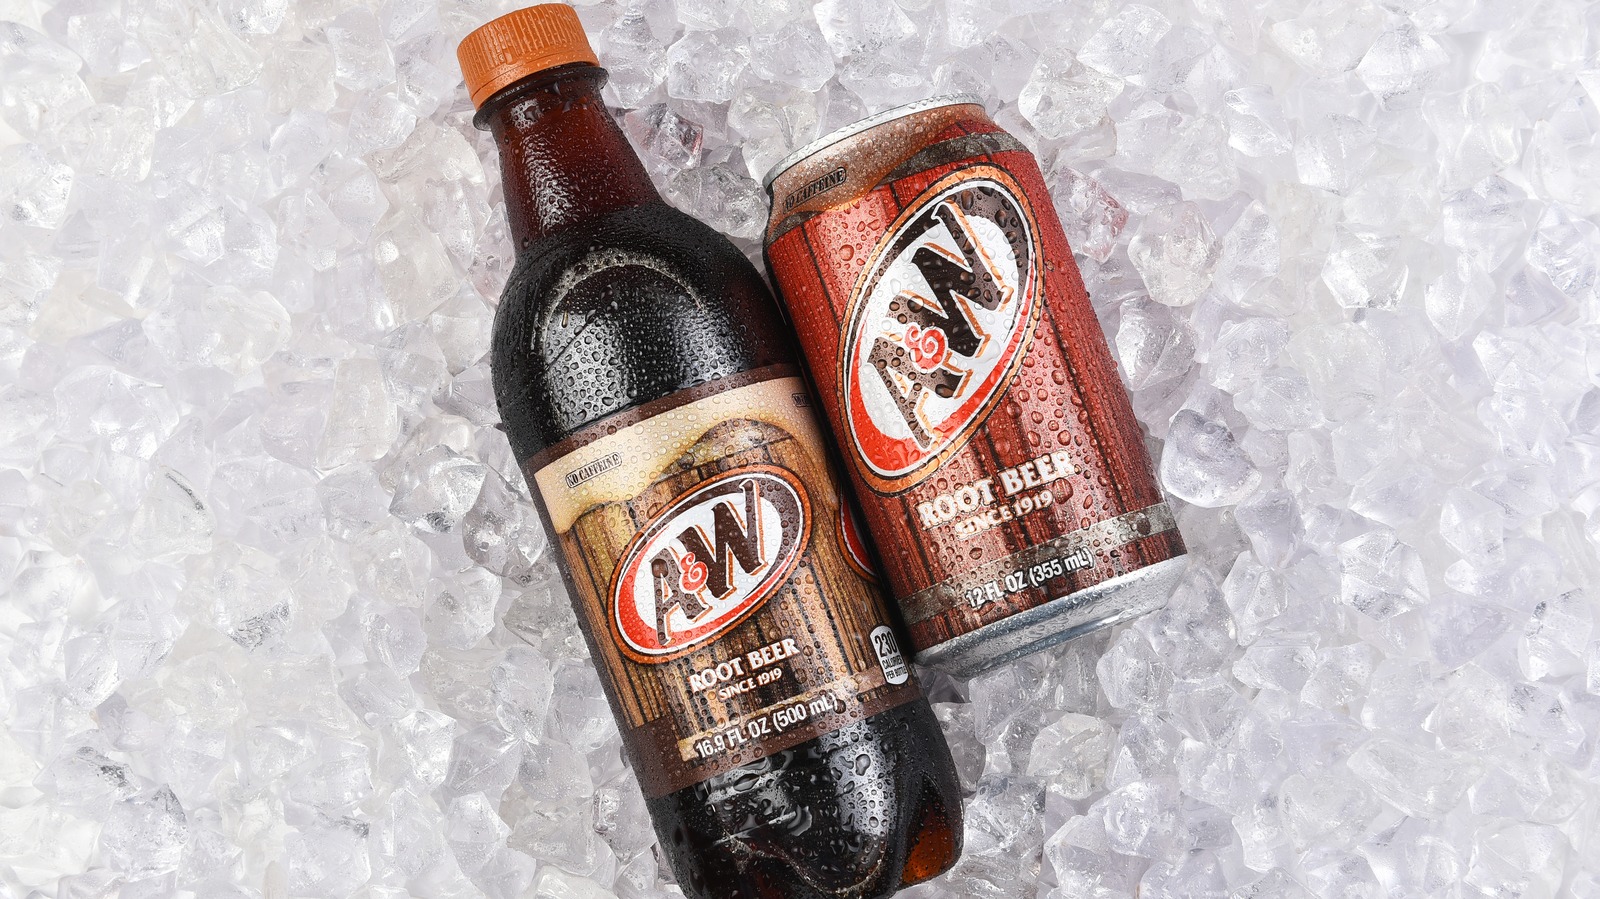 A&W Class Action Settlement Reached Over Misleading Vanilla Claims